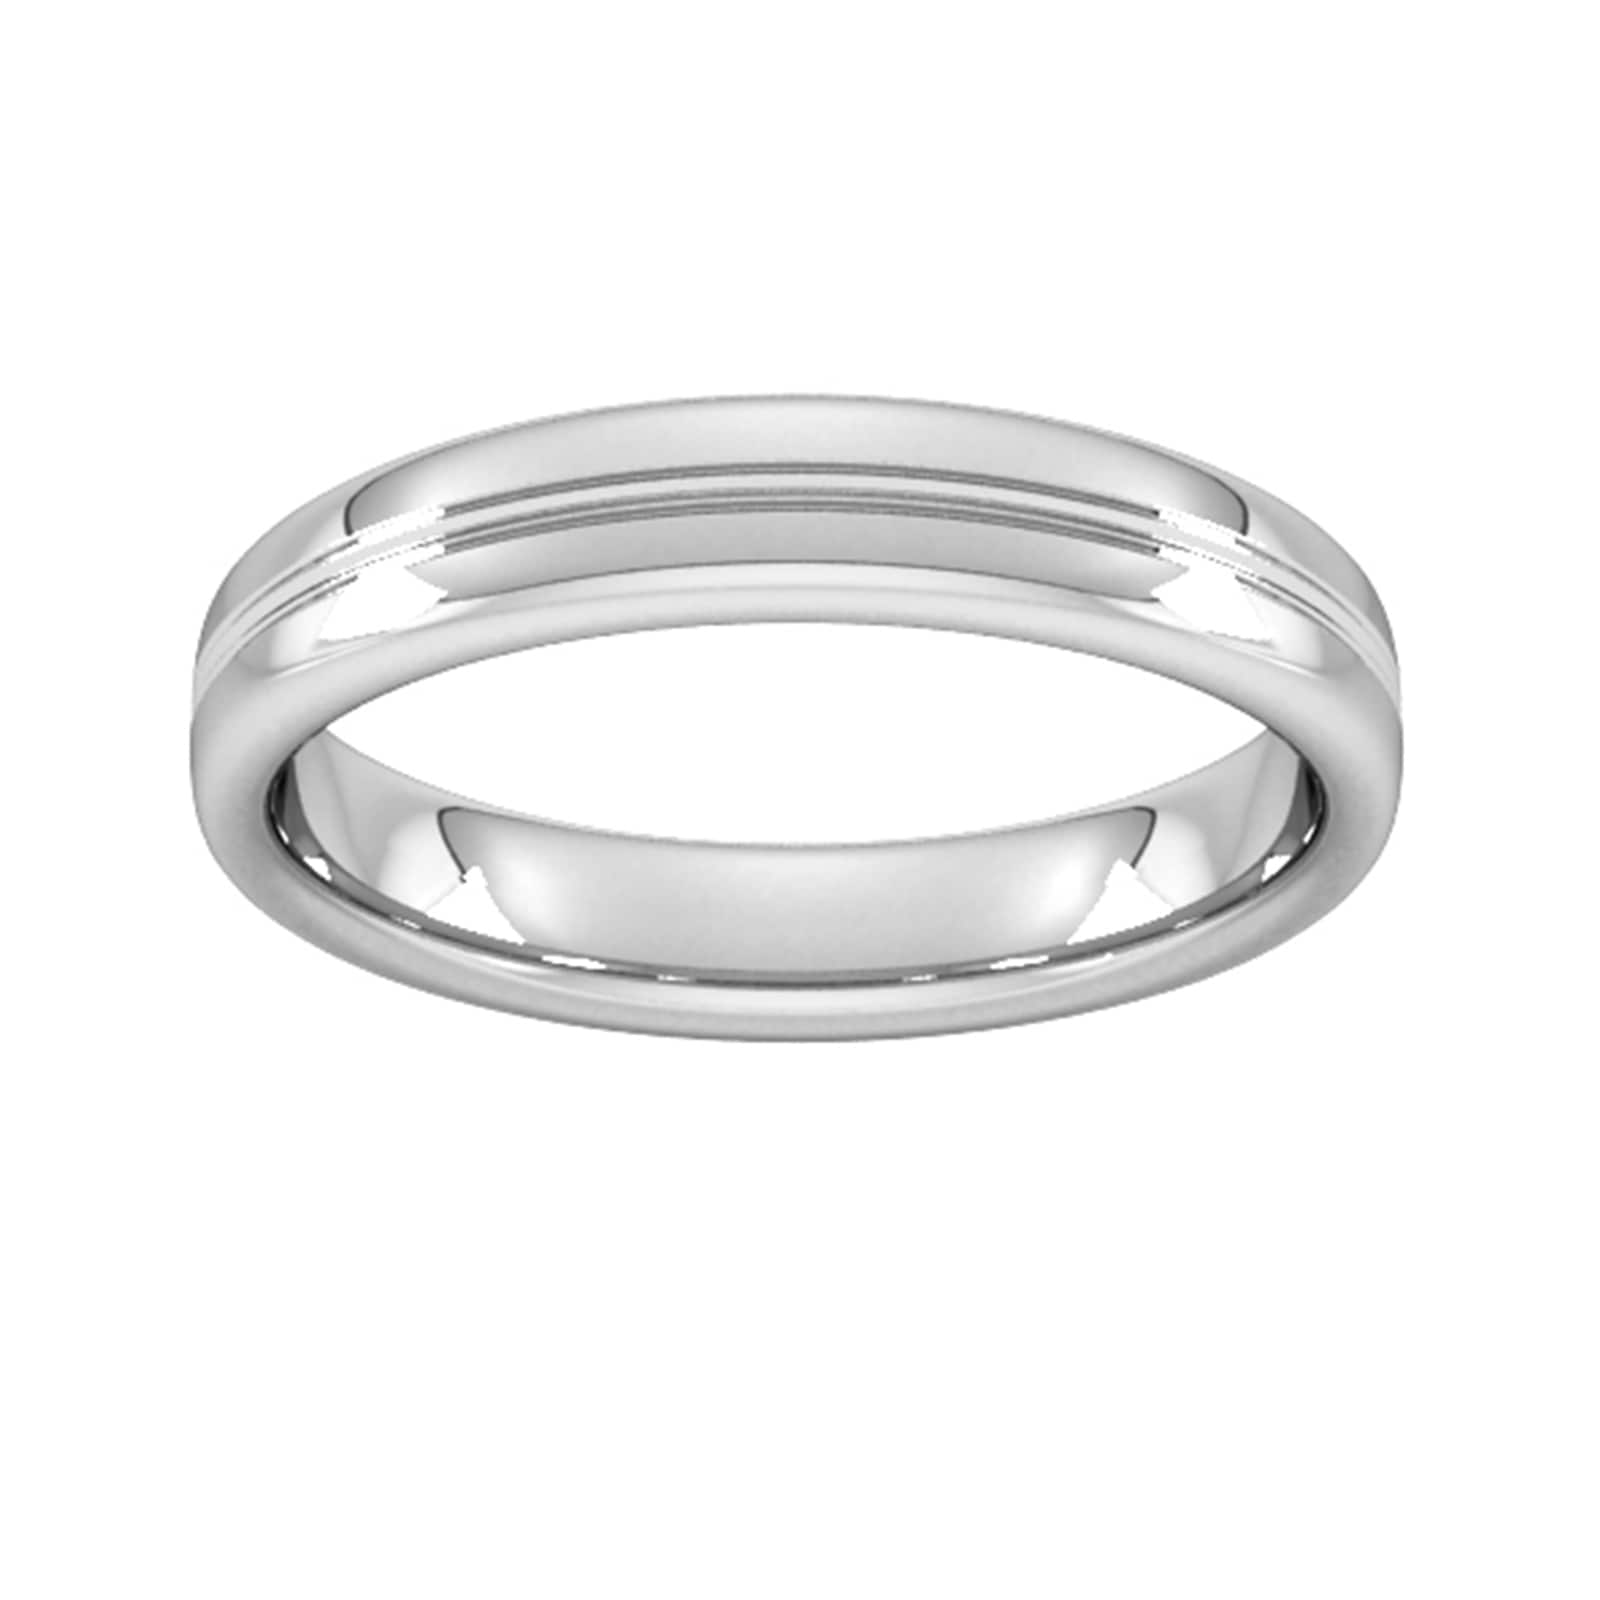 4mm Slight Court Standard Grooved Polished Finish Wedding Ring In 9 Carat White Gold - Ring Size J